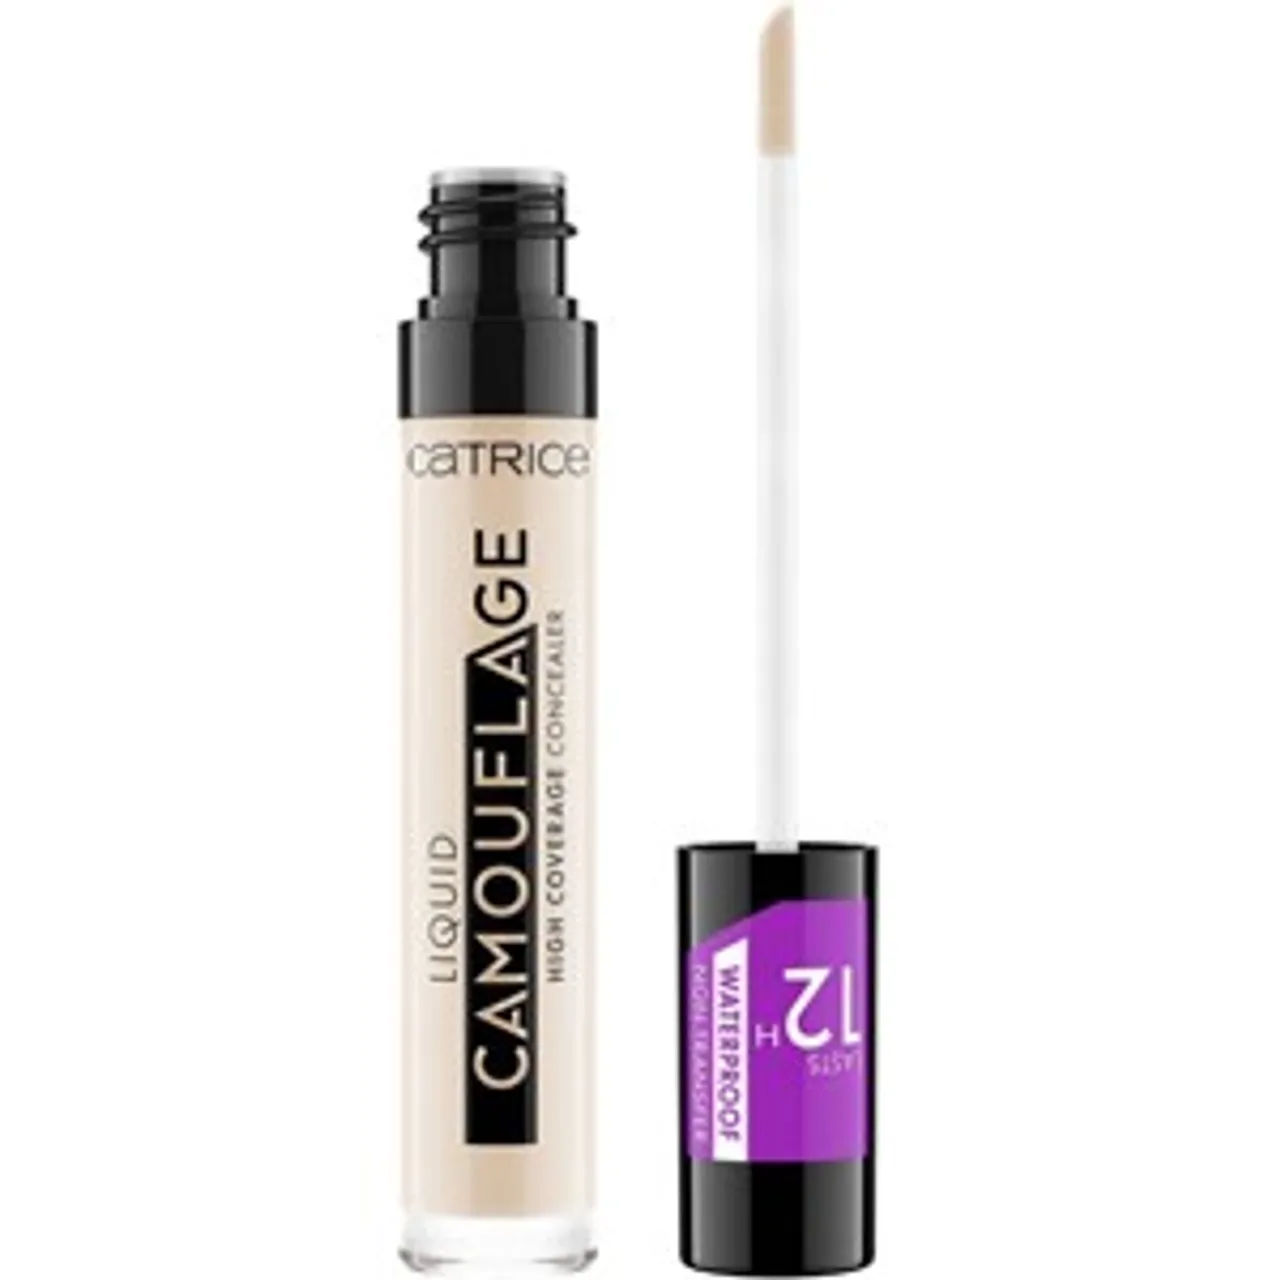 Catrice Liquid Camouflage High Coverage Concealer Female 5 ml